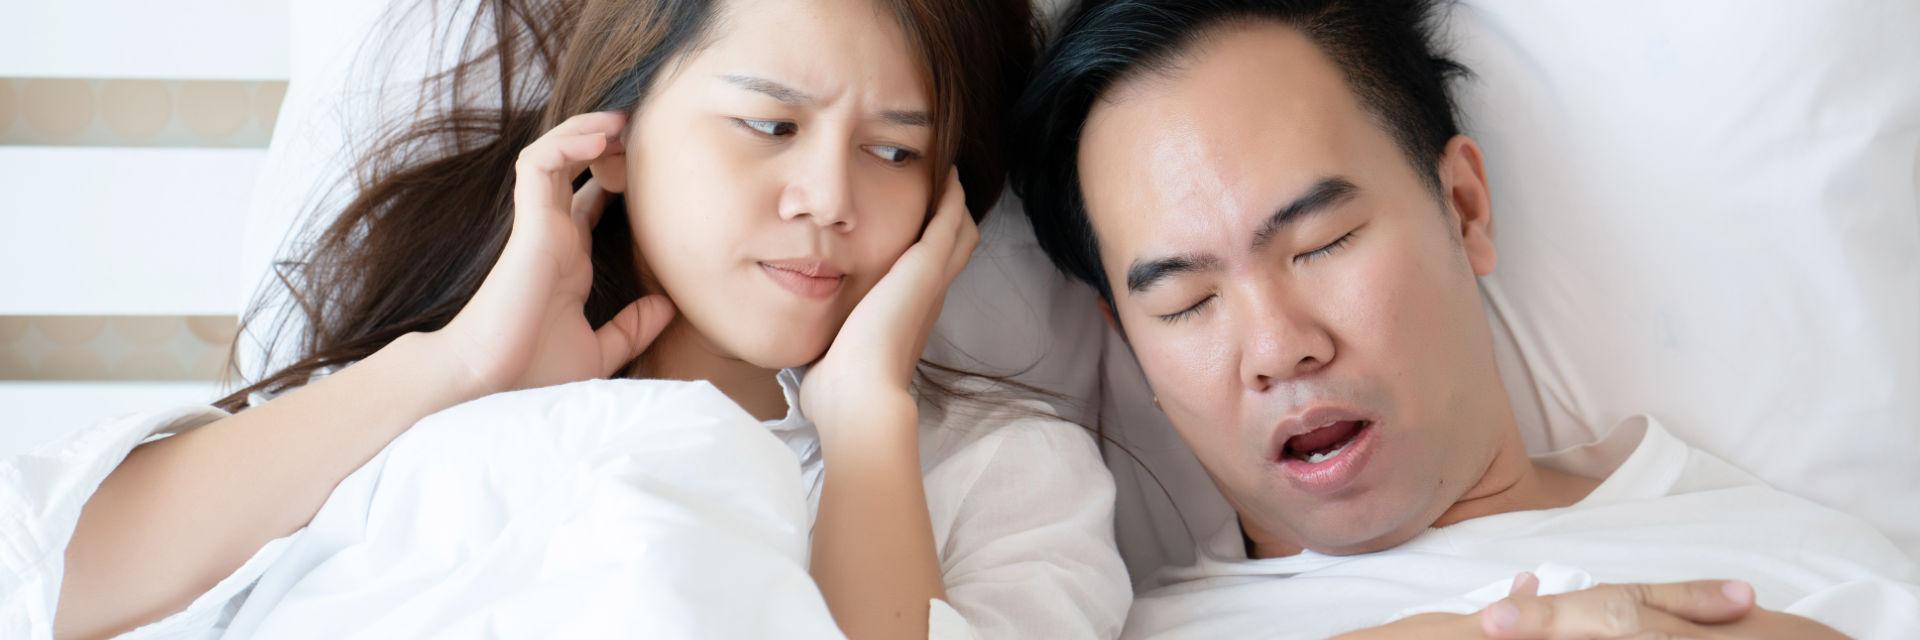 A snoring man sleeping next to an annoyed woman blocking her ears.